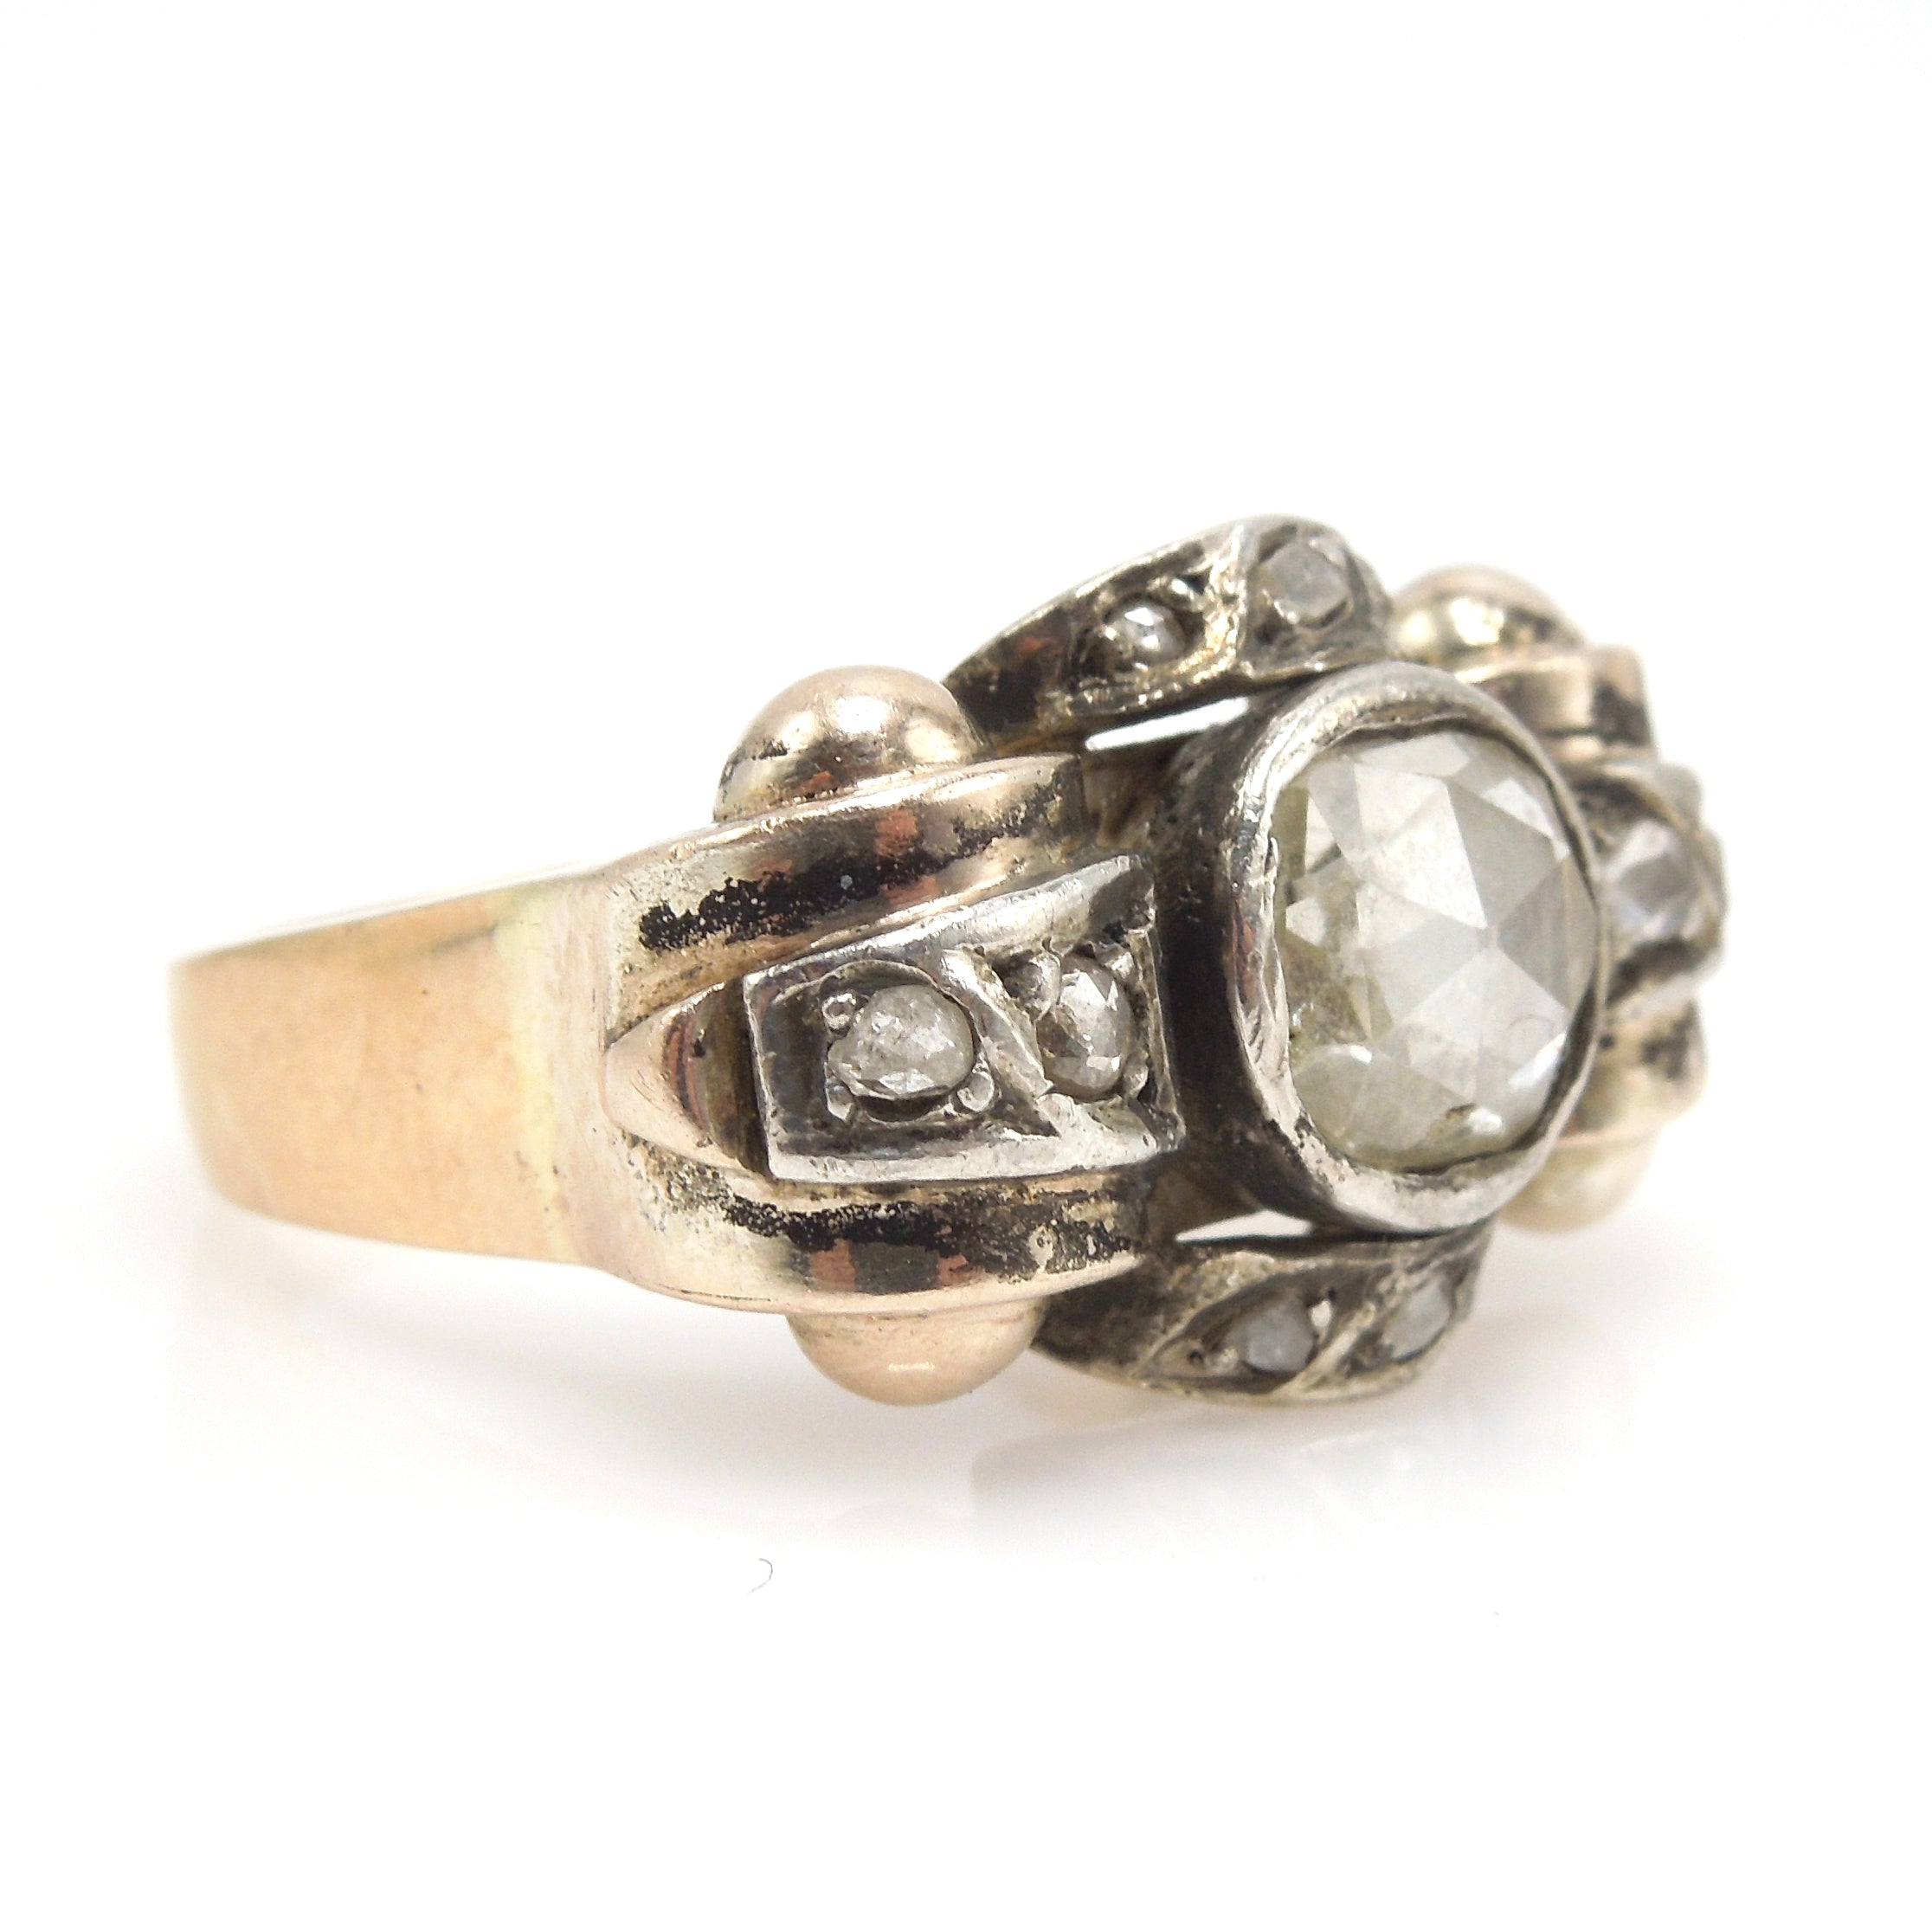 Large Retro Rose Cut Diamond Ring in Gold and Sterling Silver